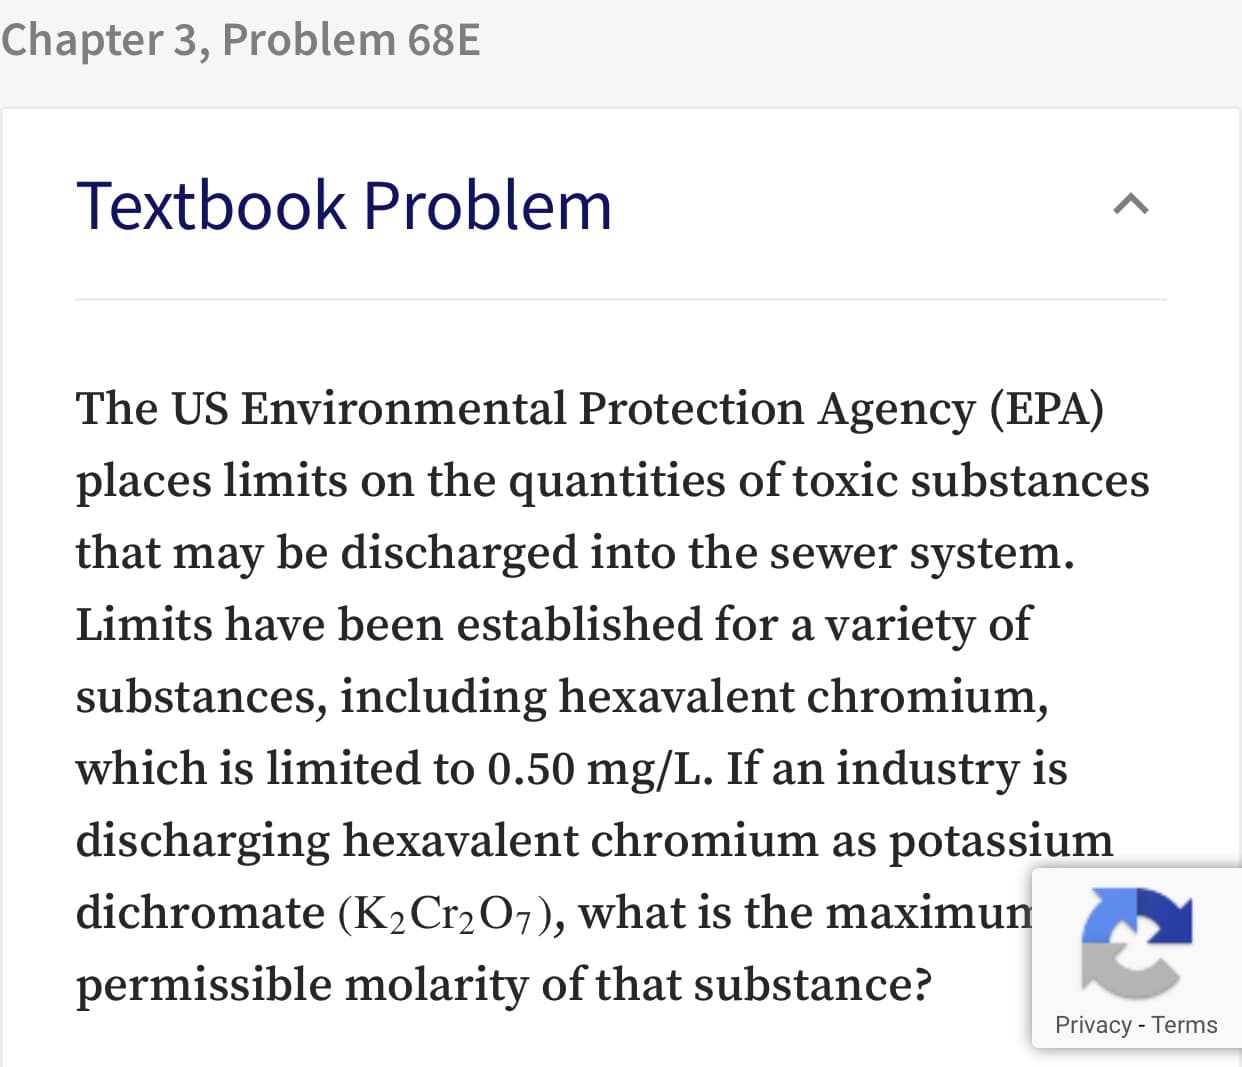 Chapter 3, Problem 68E
Textbook Problem
The US Environmental Protection Agency (EPA)
places limits on the quantities of toxic substances
that may be discharged into the sewer system.
Limits have been established for a variety of
substances, including hexavalent chromium,
which is limited to 0.50 mg/L. If an industry is
discharging hexavalent chromium as potassium
dichromate (K2Cr2O7), what is the maximun
permissible molarity of that substance?
Privacy - Terms
